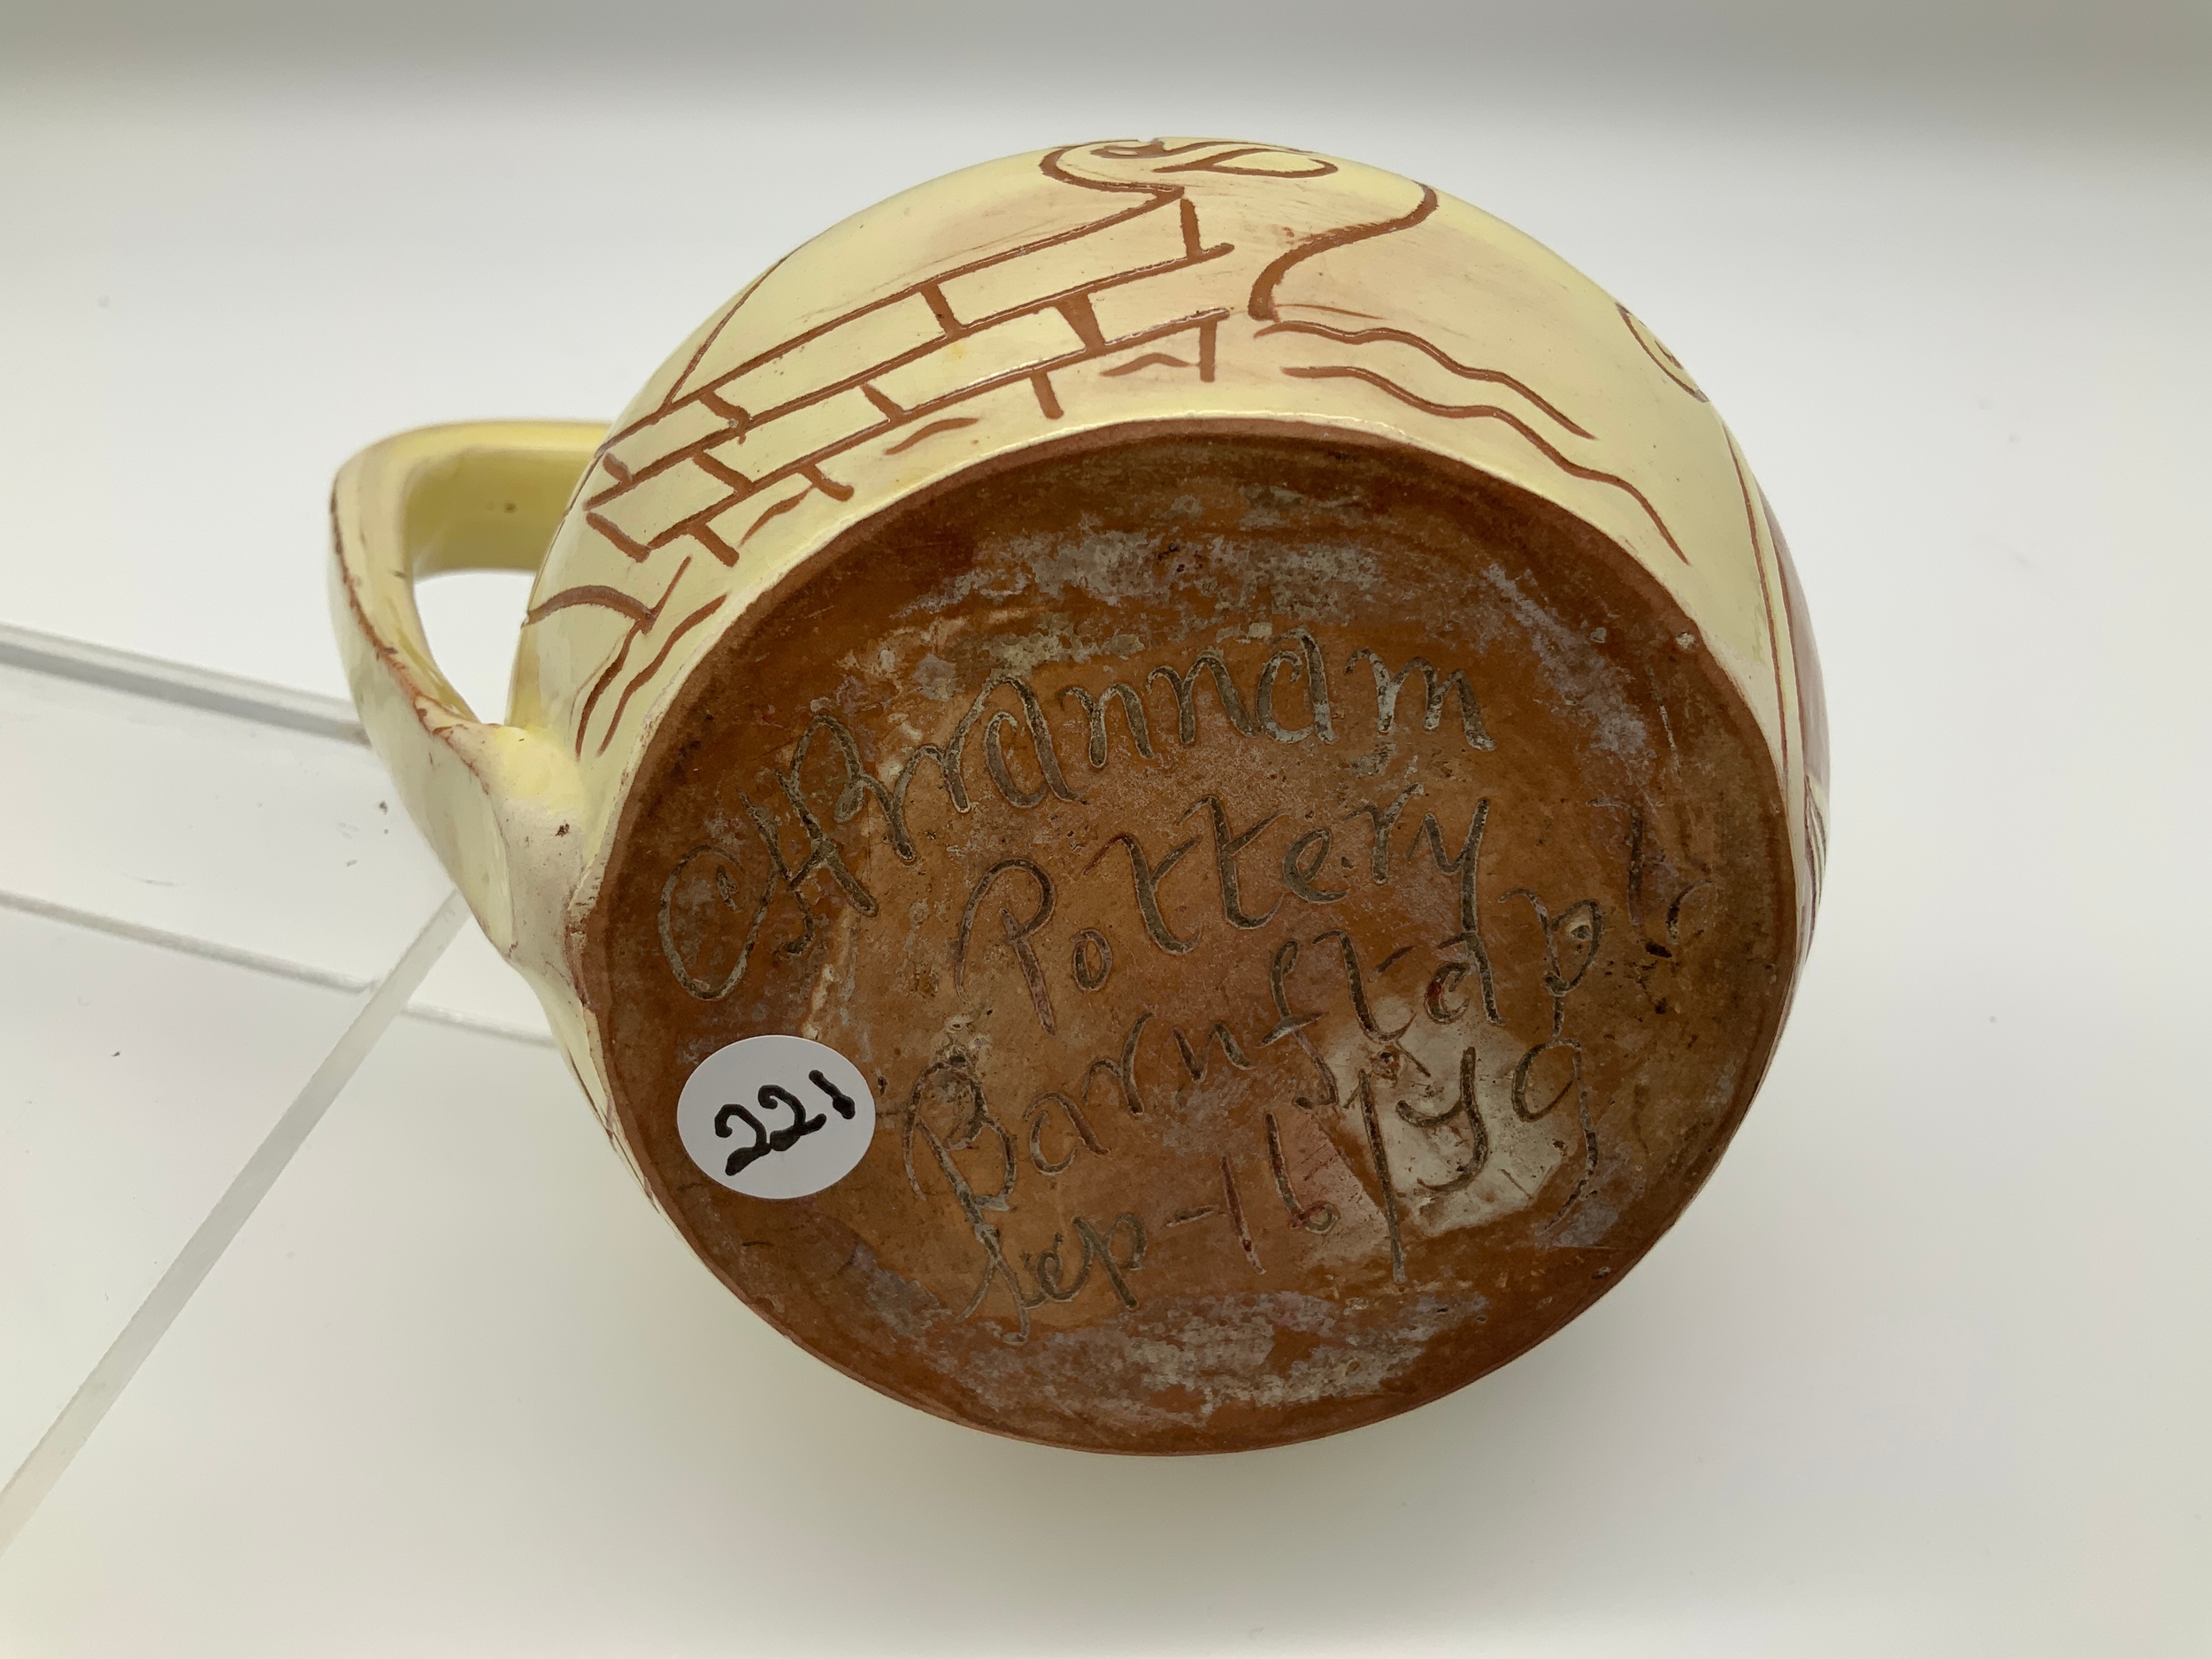 Barnstaple Art Pottery - Brannam Jug - One of the First Year of Firing - Signed CHB - Sept 16/79 - Image 3 of 3